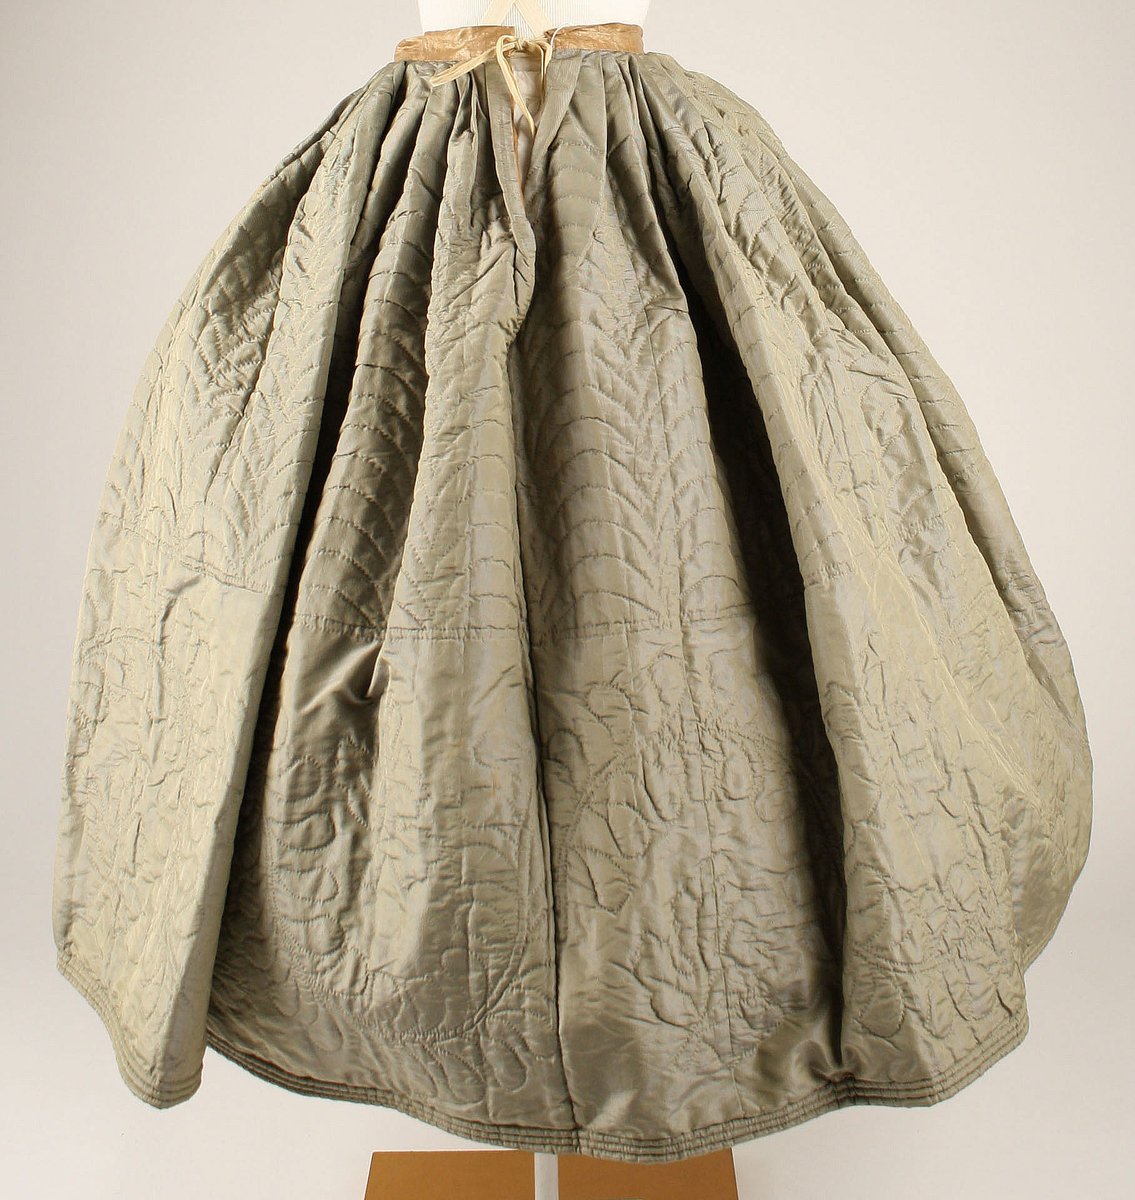 Often a petticoat of this stiffened fabric was worn with up to six starched petticoats in an attempt to achieve the big skirt effect; these tangling petticoats were heavy, bulky and generally uncomfortable.